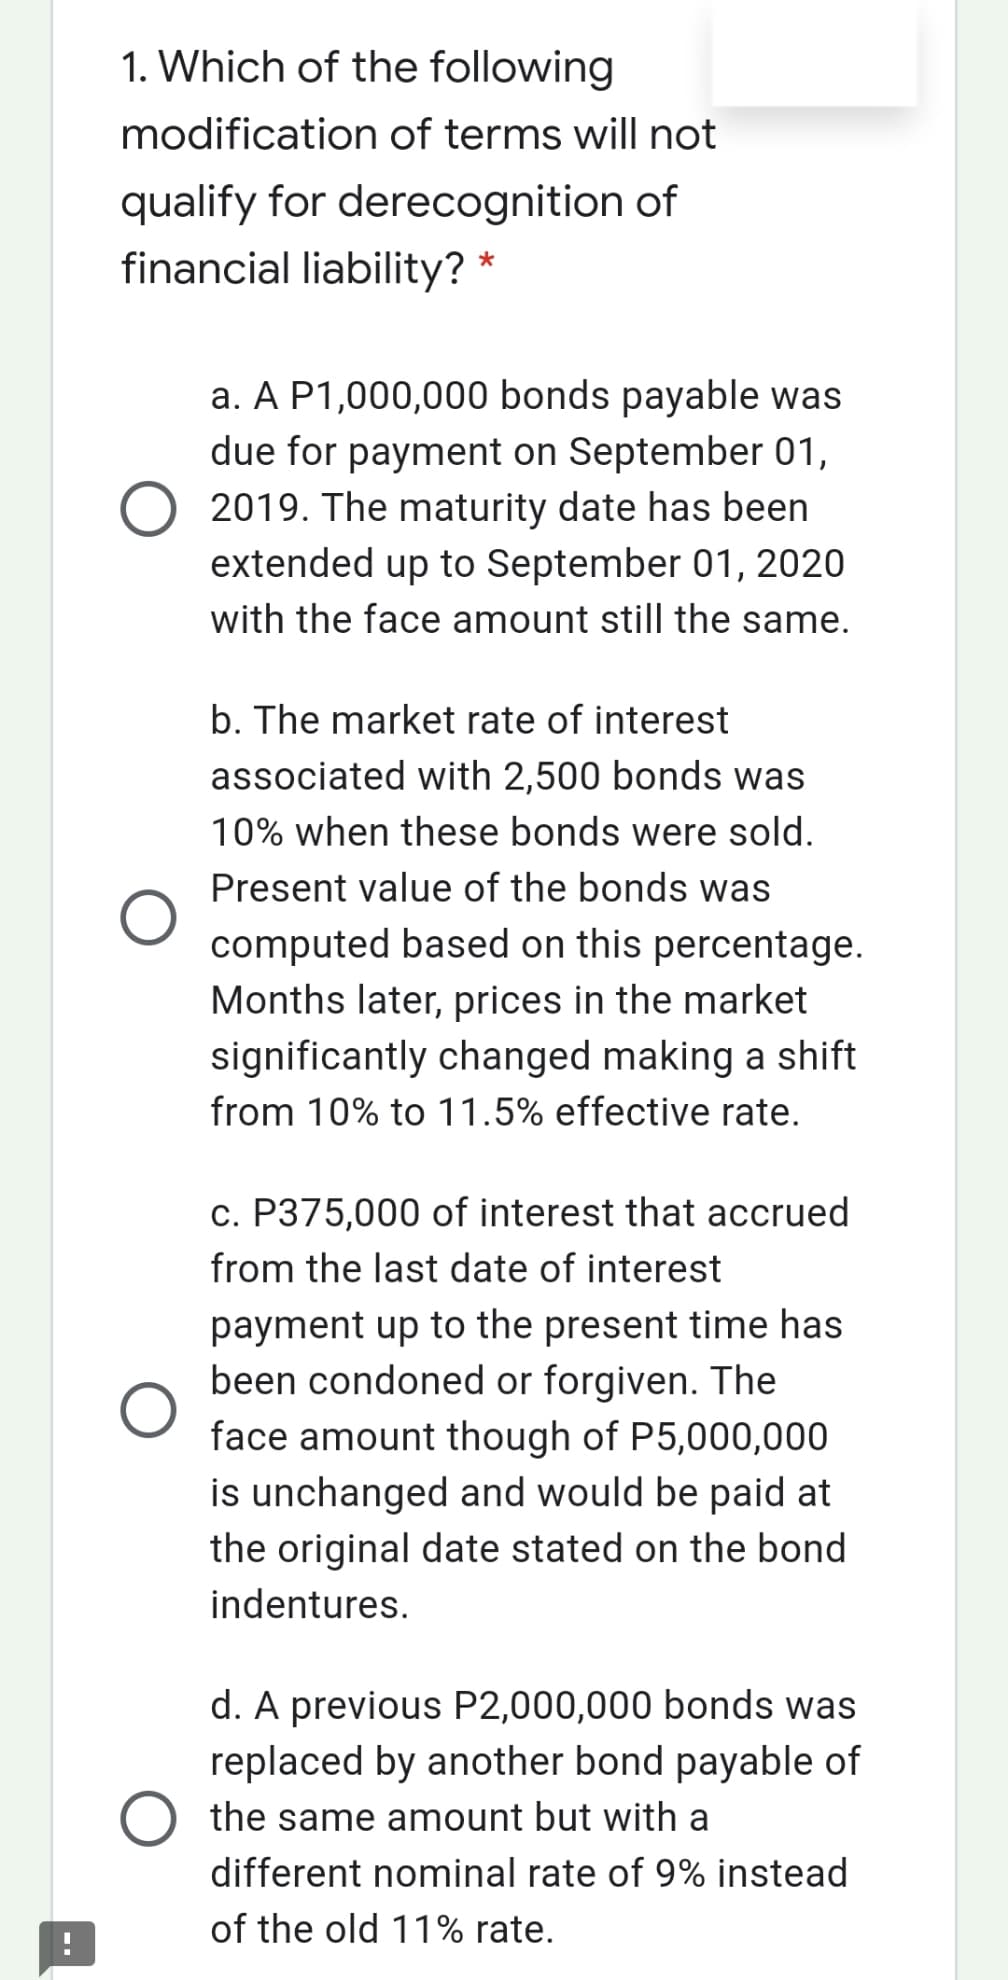 1. Which of the following
modification of terms will not
qualify for derecognition of
financial liability? *
a. A P1,000,000 bonds payable was
due for payment on September 01,
2019. The maturity date has been
extended up to September 01, 2020
with the face amount still the same.
b. The market rate of interest
associated with 2,500 bonds was
10% when these bonds were sold.
Present value of the bonds was
computed based on this percentage.
Months later, prices in the market
significantly changed making a shift
from 10% to 11.5% effective rate.
c. P375,000 of interest that accrued
from the last date of interest
payment up to the present time has
been condoned or forgiven. The
face amount though of P5,000,000
is unchanged and would be paid at
the original date stated on the bond
indentures.
d. A previous P2,000,000 bonds was
replaced by another bond payable of
the same amount but with a
different nominal rate of 9% instead
of the old 11% rate.
